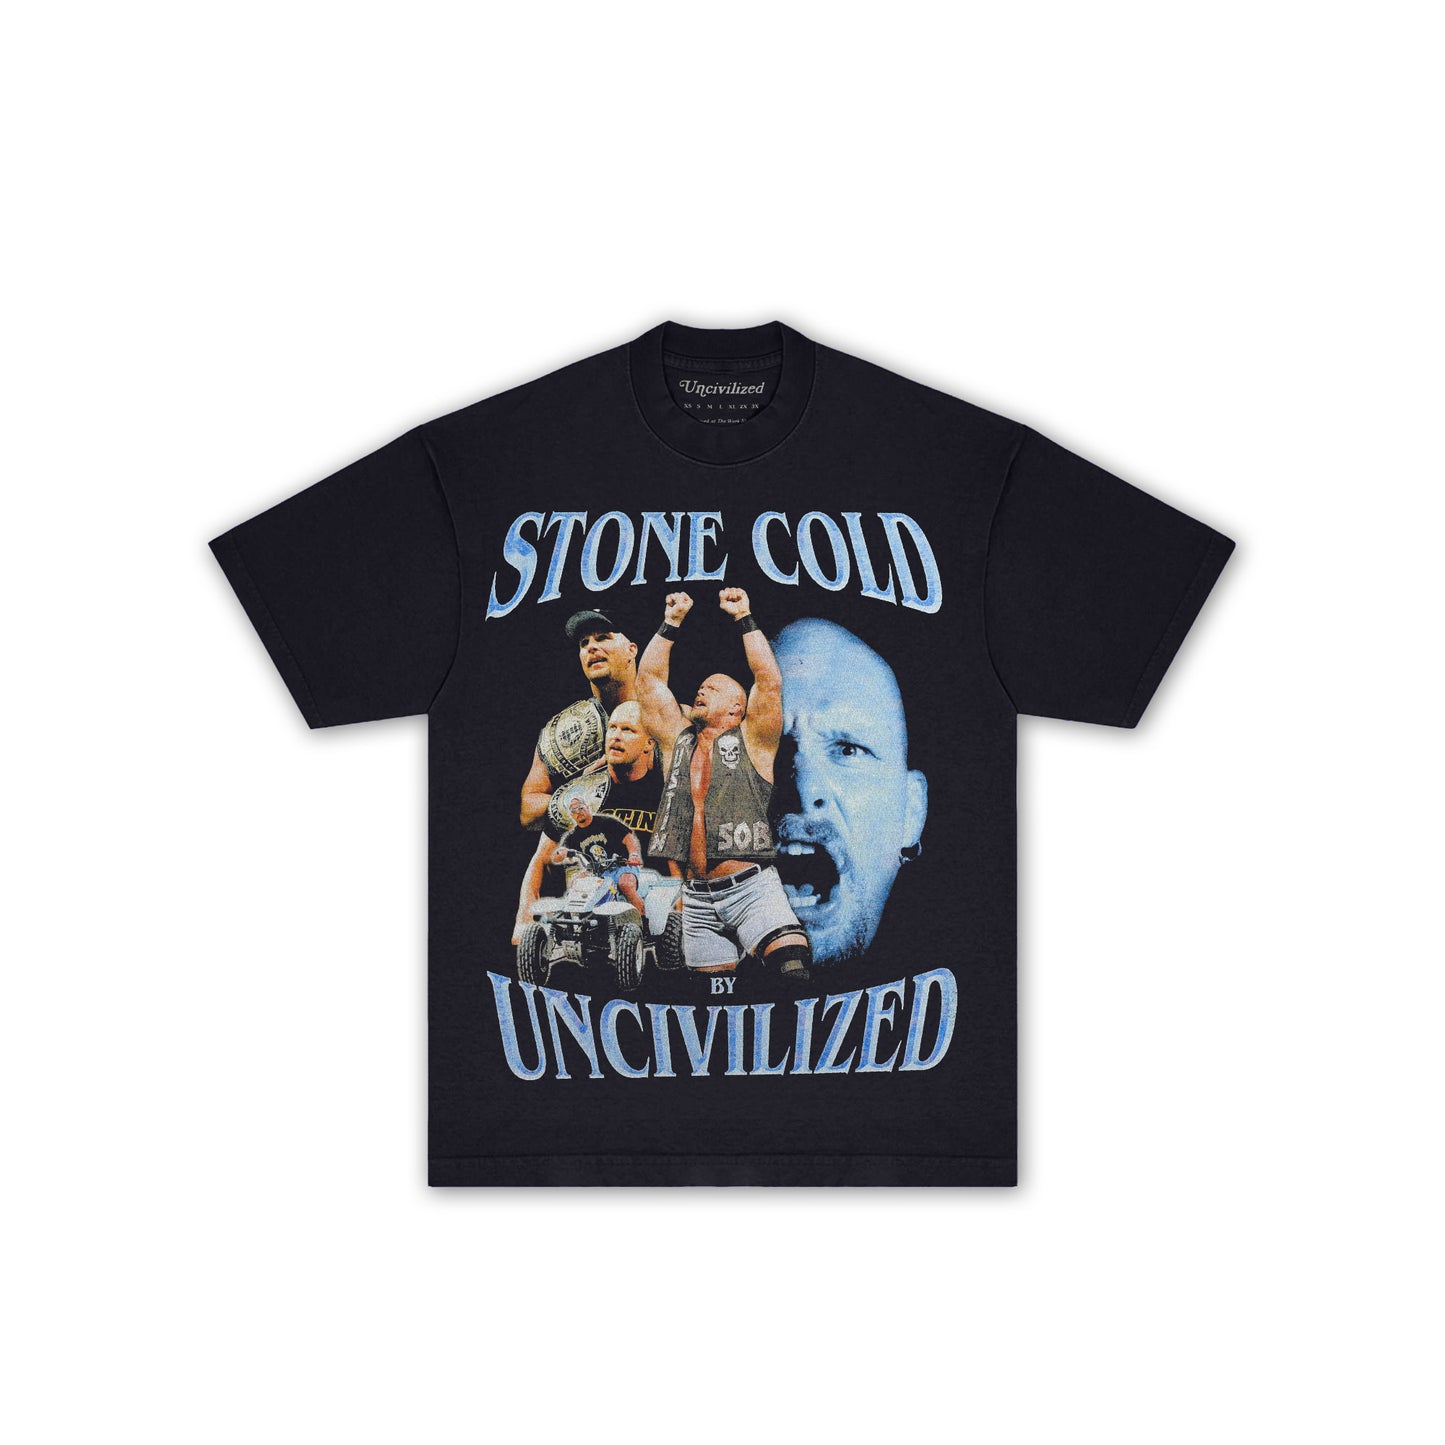 UNCIVILIZED "STONE COLD DAY" T-SHIRT